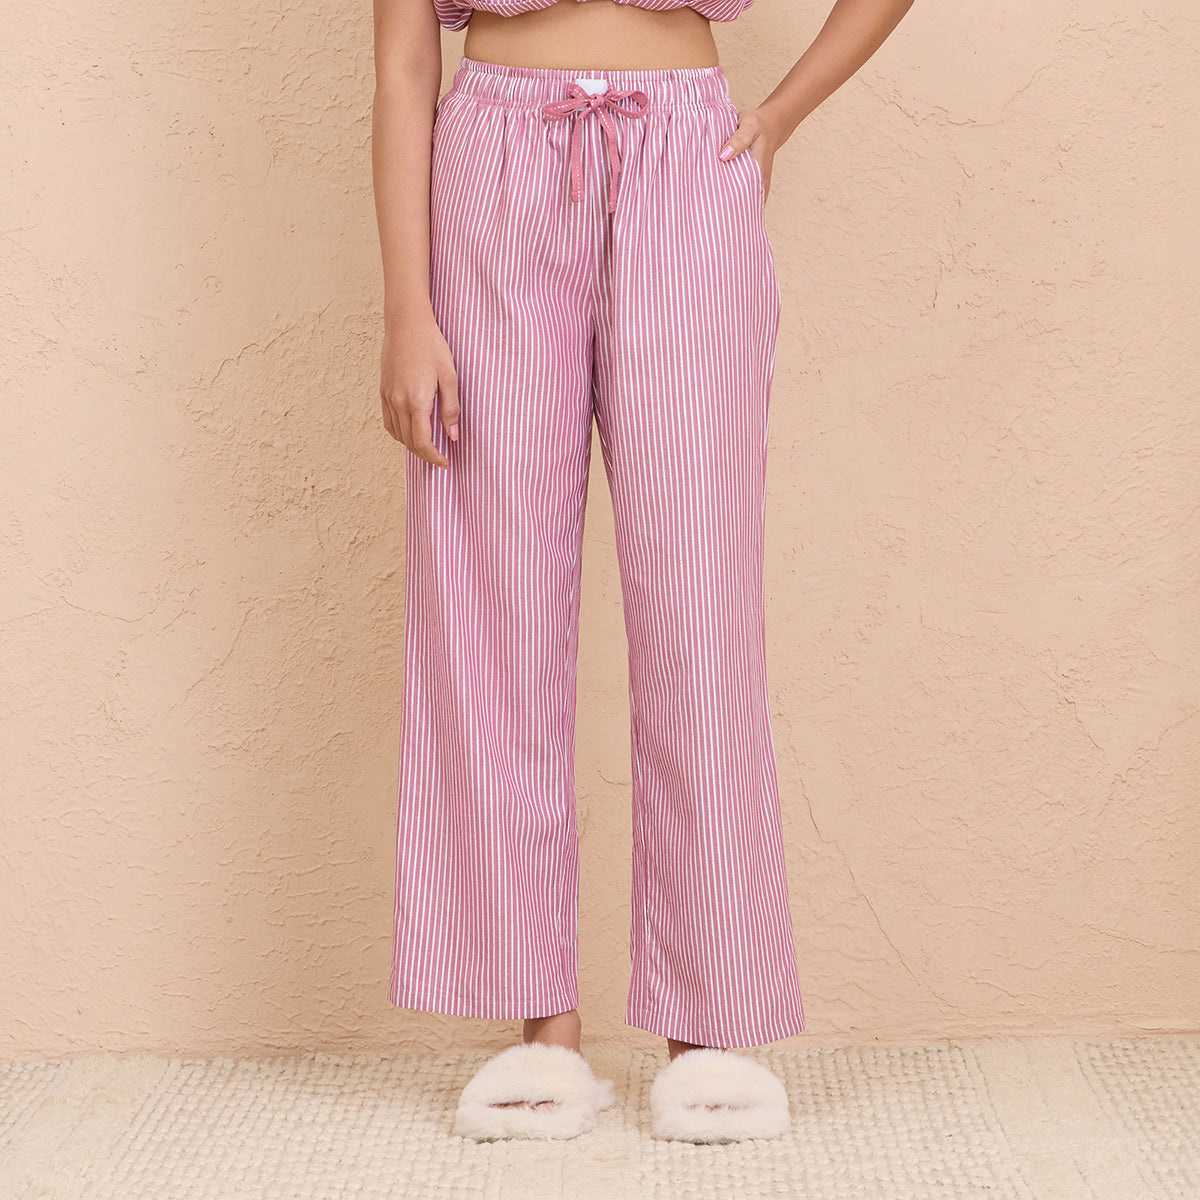 Nykd By Nykaa Super Comfy Cotton Relax Fit Pajama-NYS141-Grape Stripe